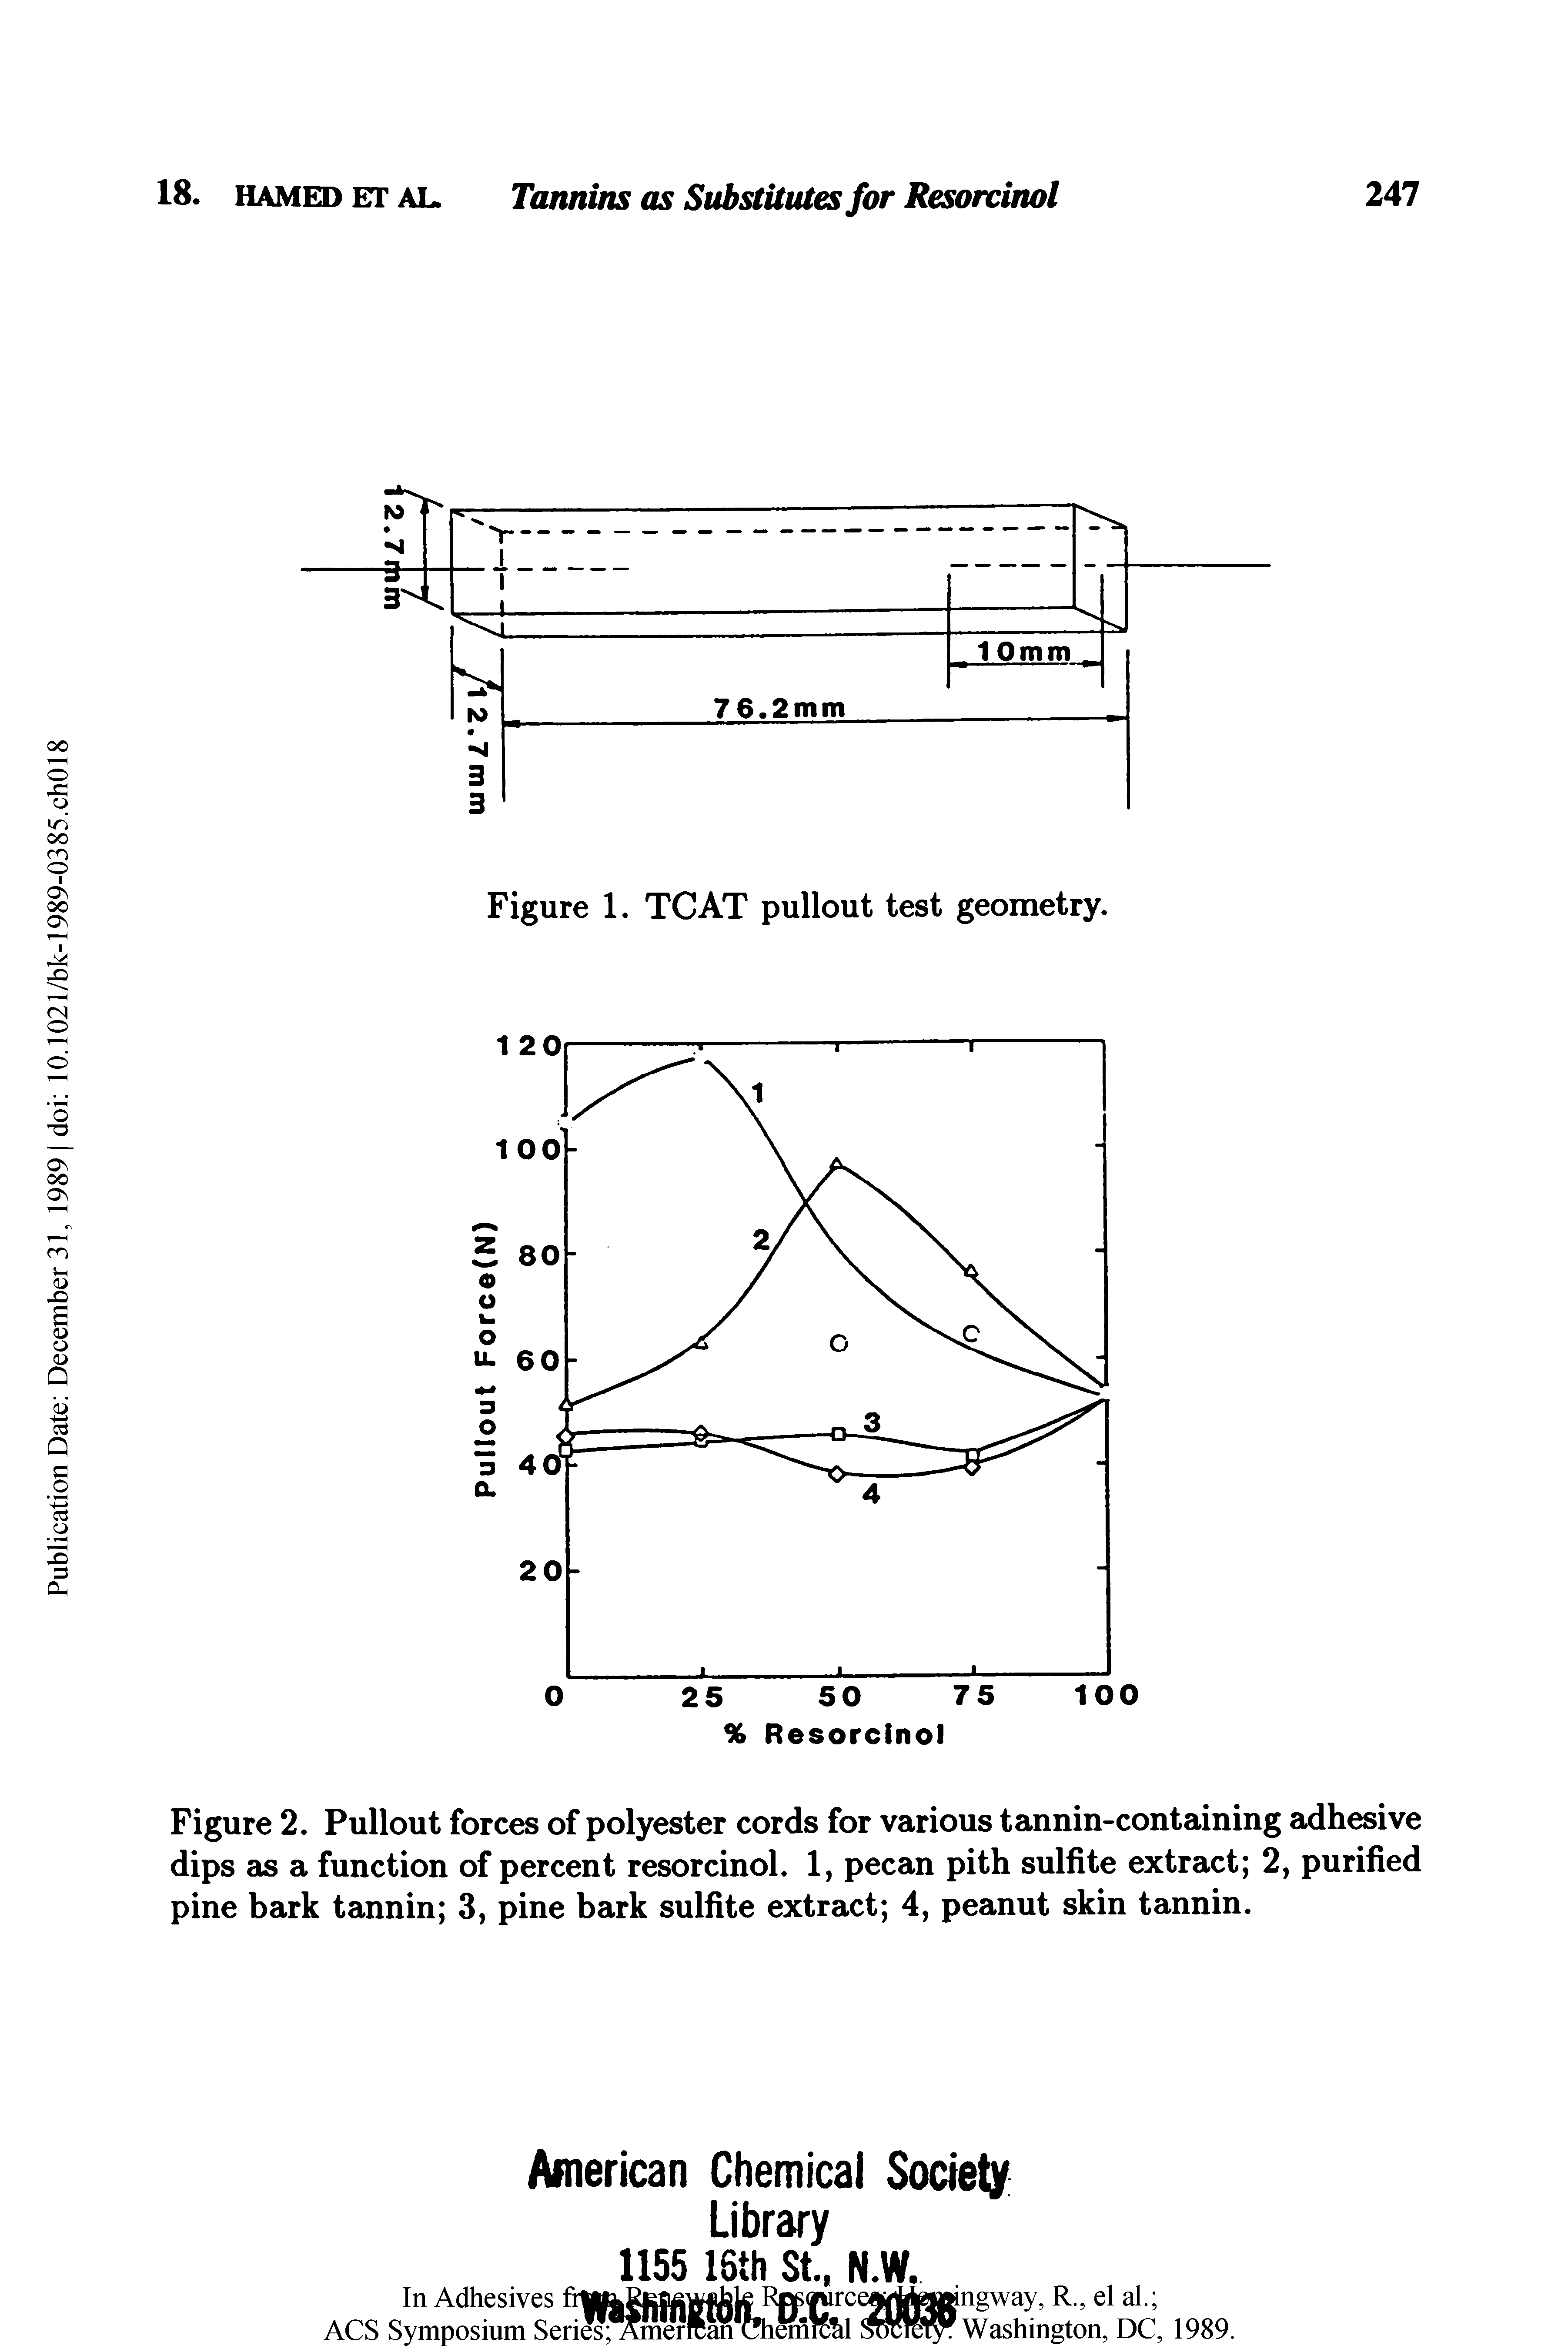 Figure 2. Pullout forces of polyester cords for various tannin-containing adhesive dips as a function of percent resorcinol. 1, pecan pith sulfite extract 2, purified pine bark tannin 3, pine bark sulfite extract 4, peanut skin tannin.